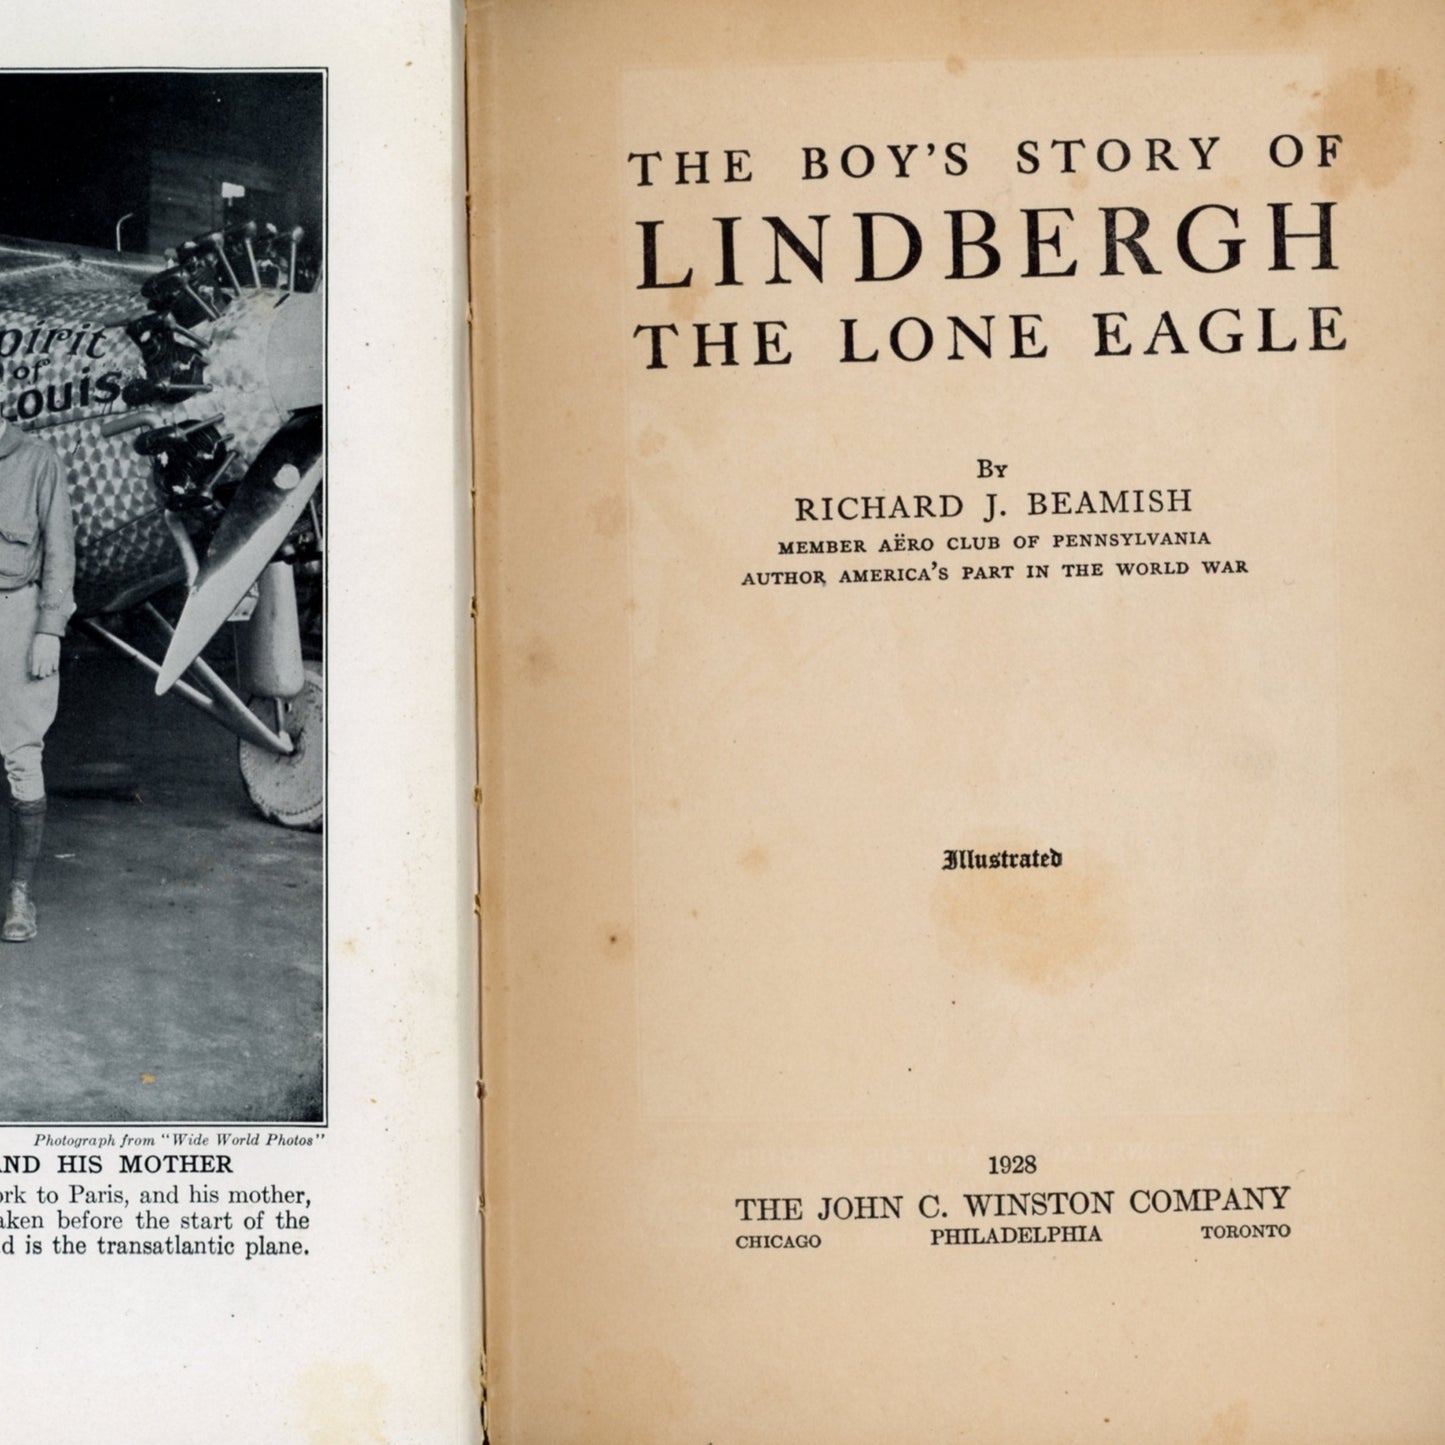 The Boy's Story of LINDBERGH THE LONE EAGLE by Richard J. Beamish ©1928